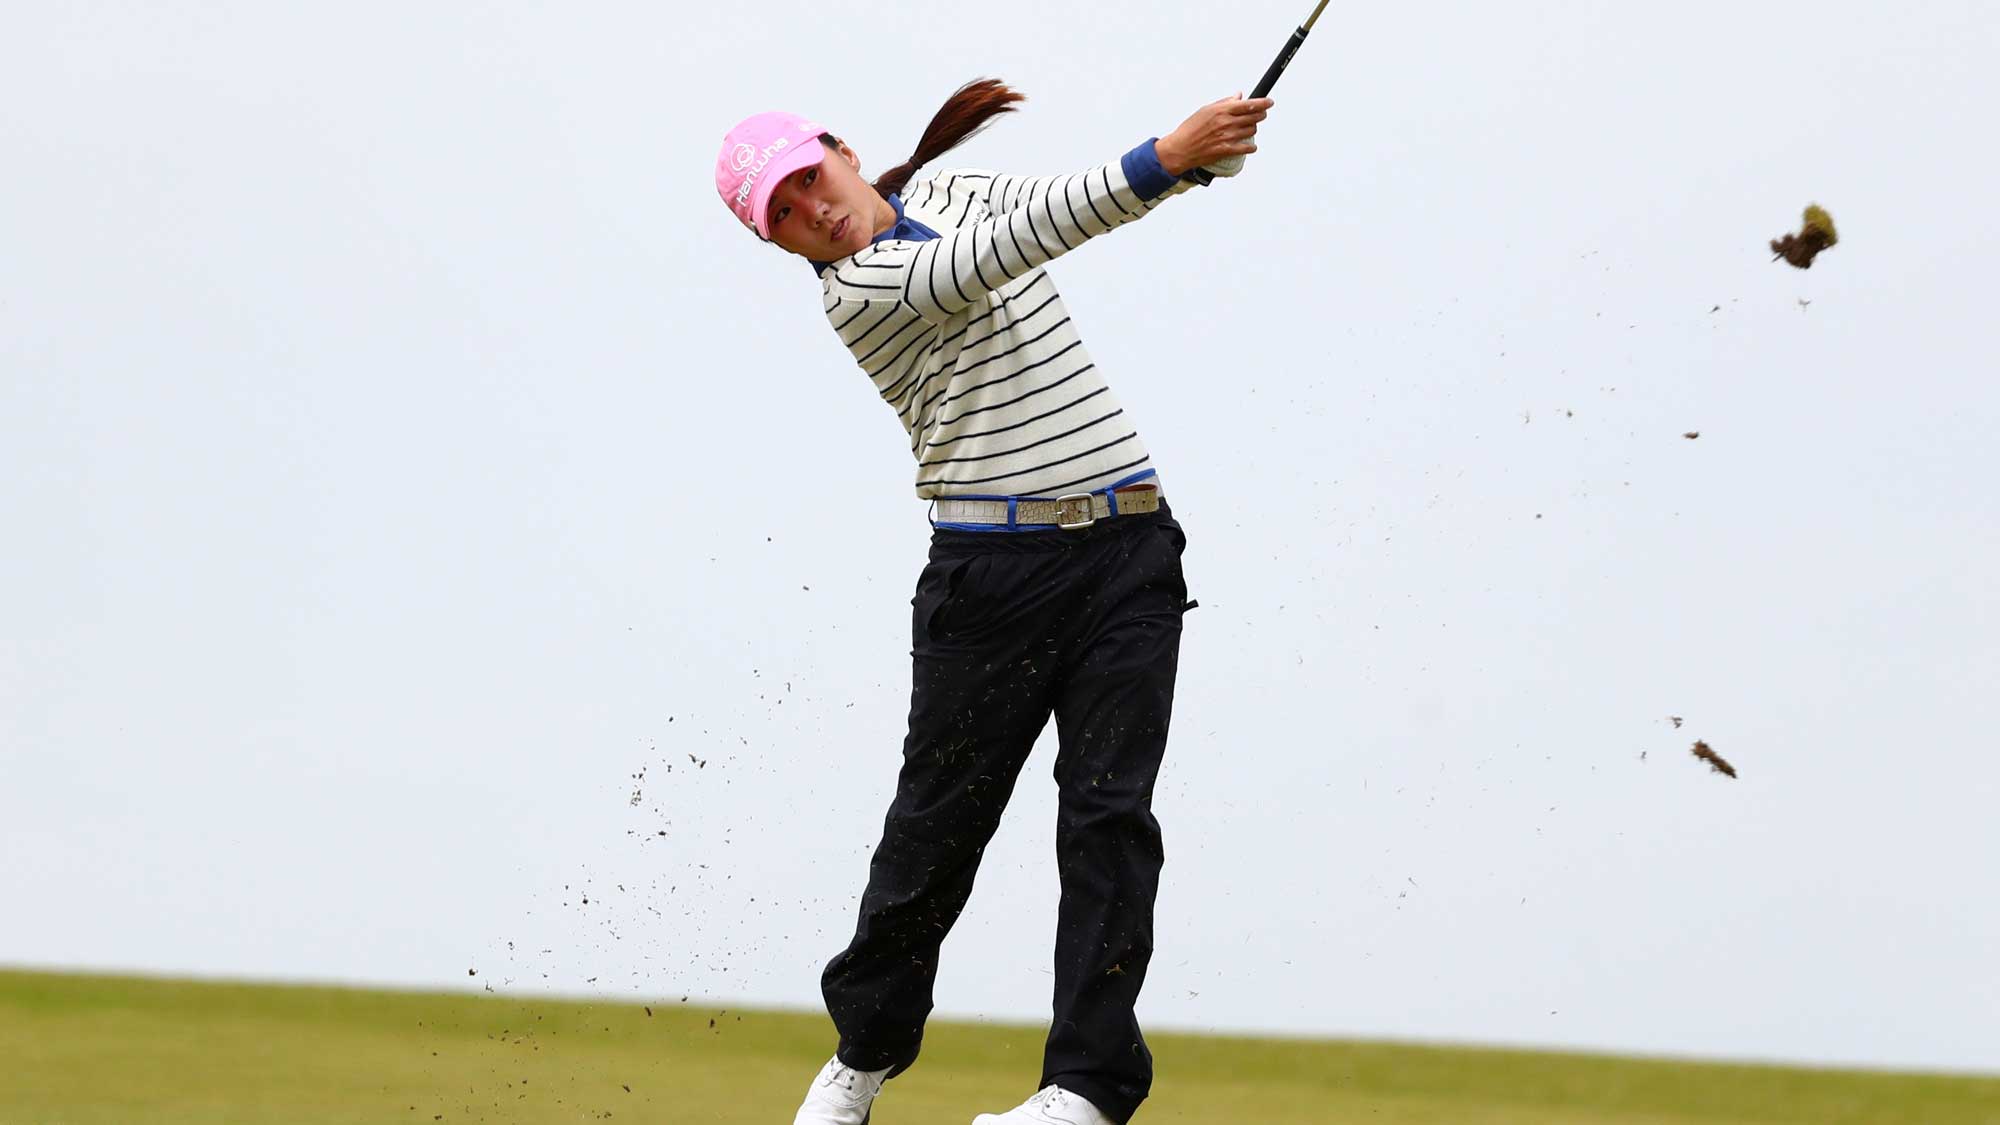 In-Kyung Kim of Korea hits her second shot on the 4th hole during the second round of the Ricoh Women's British Open at Kingsbarns Golf Links